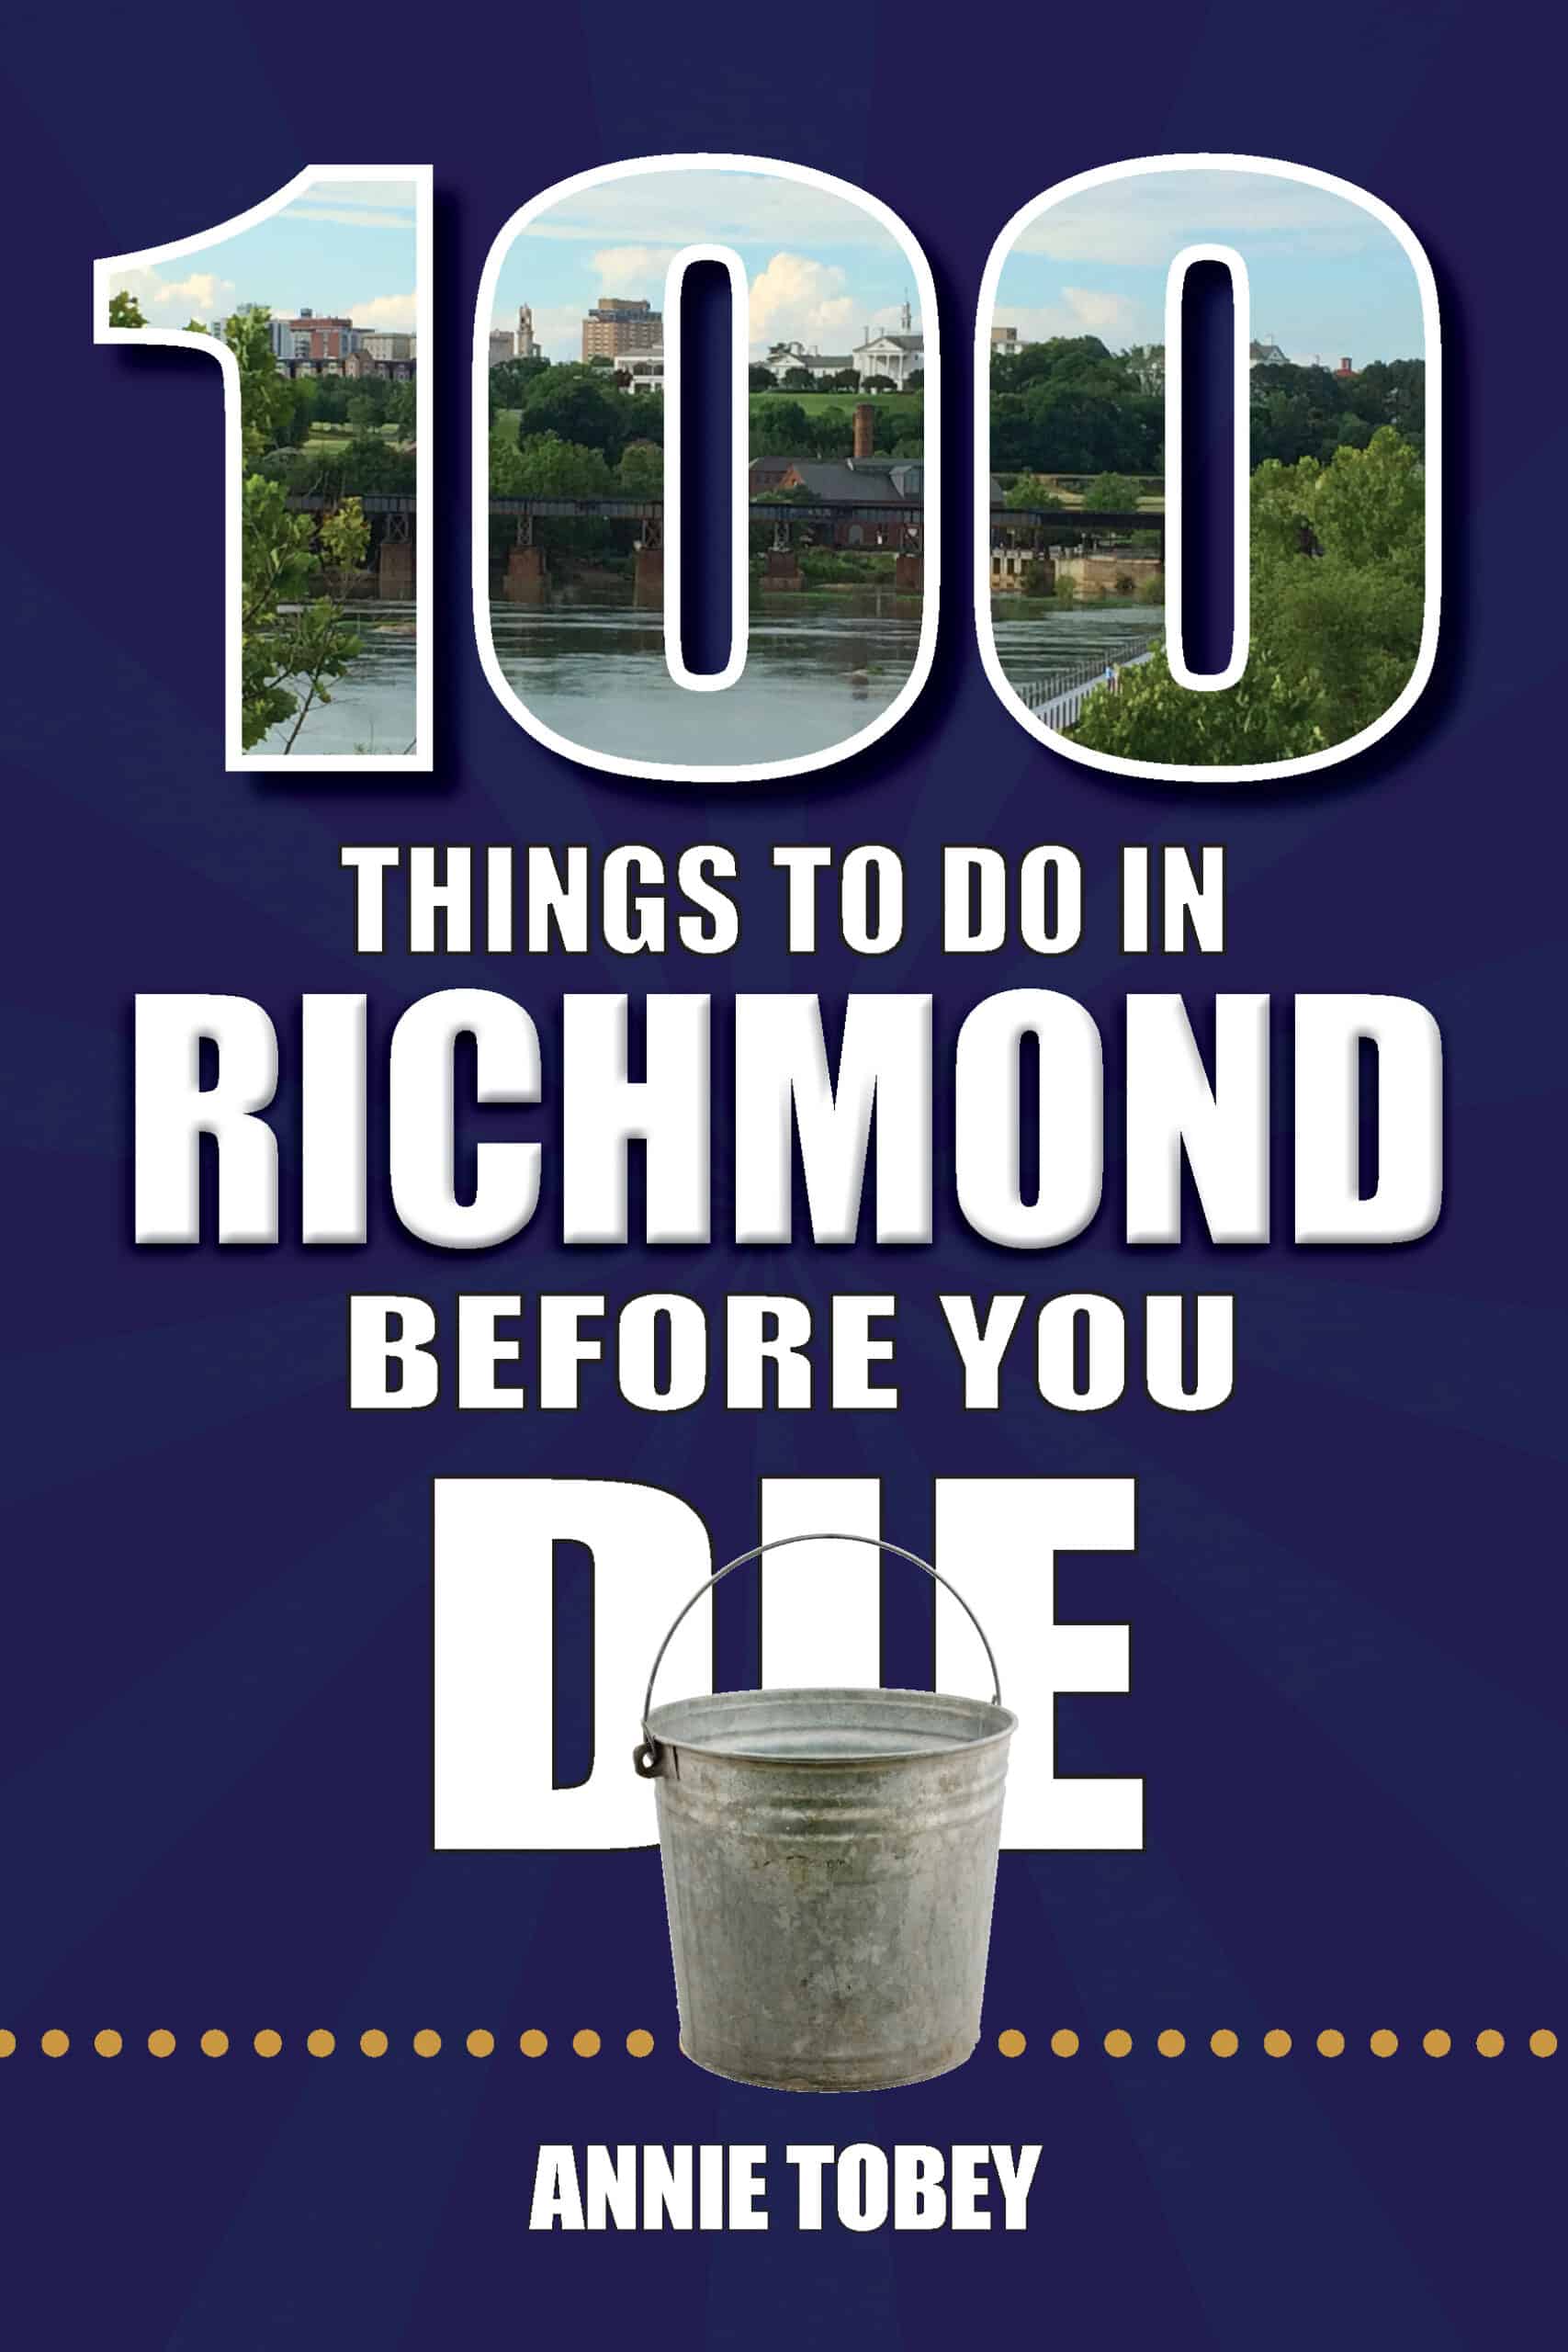 Front cover of "100 Things to Do in Richmond Before You Die" by Annie Tobey